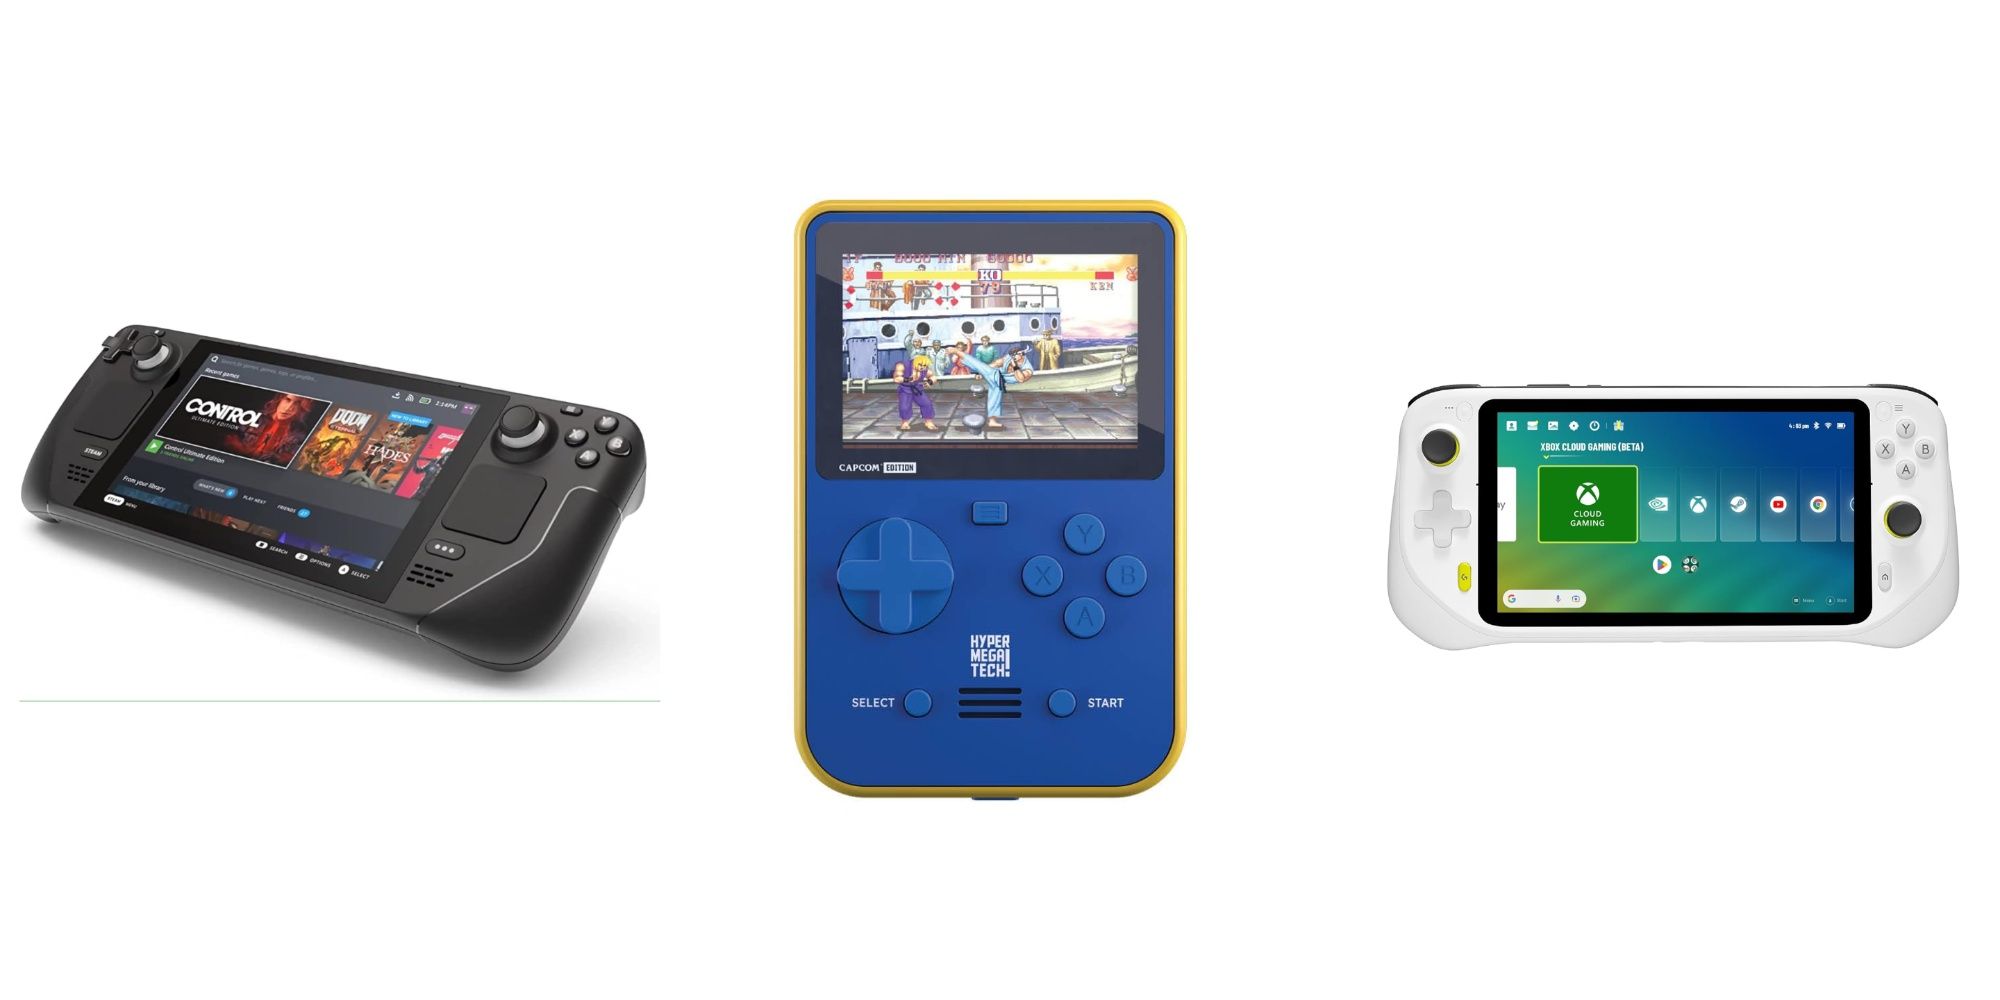 A triple image of three handheld consoles: A Steam Deck, a Super Pocket, and a Logitech G Cloud, from left to right respectively.